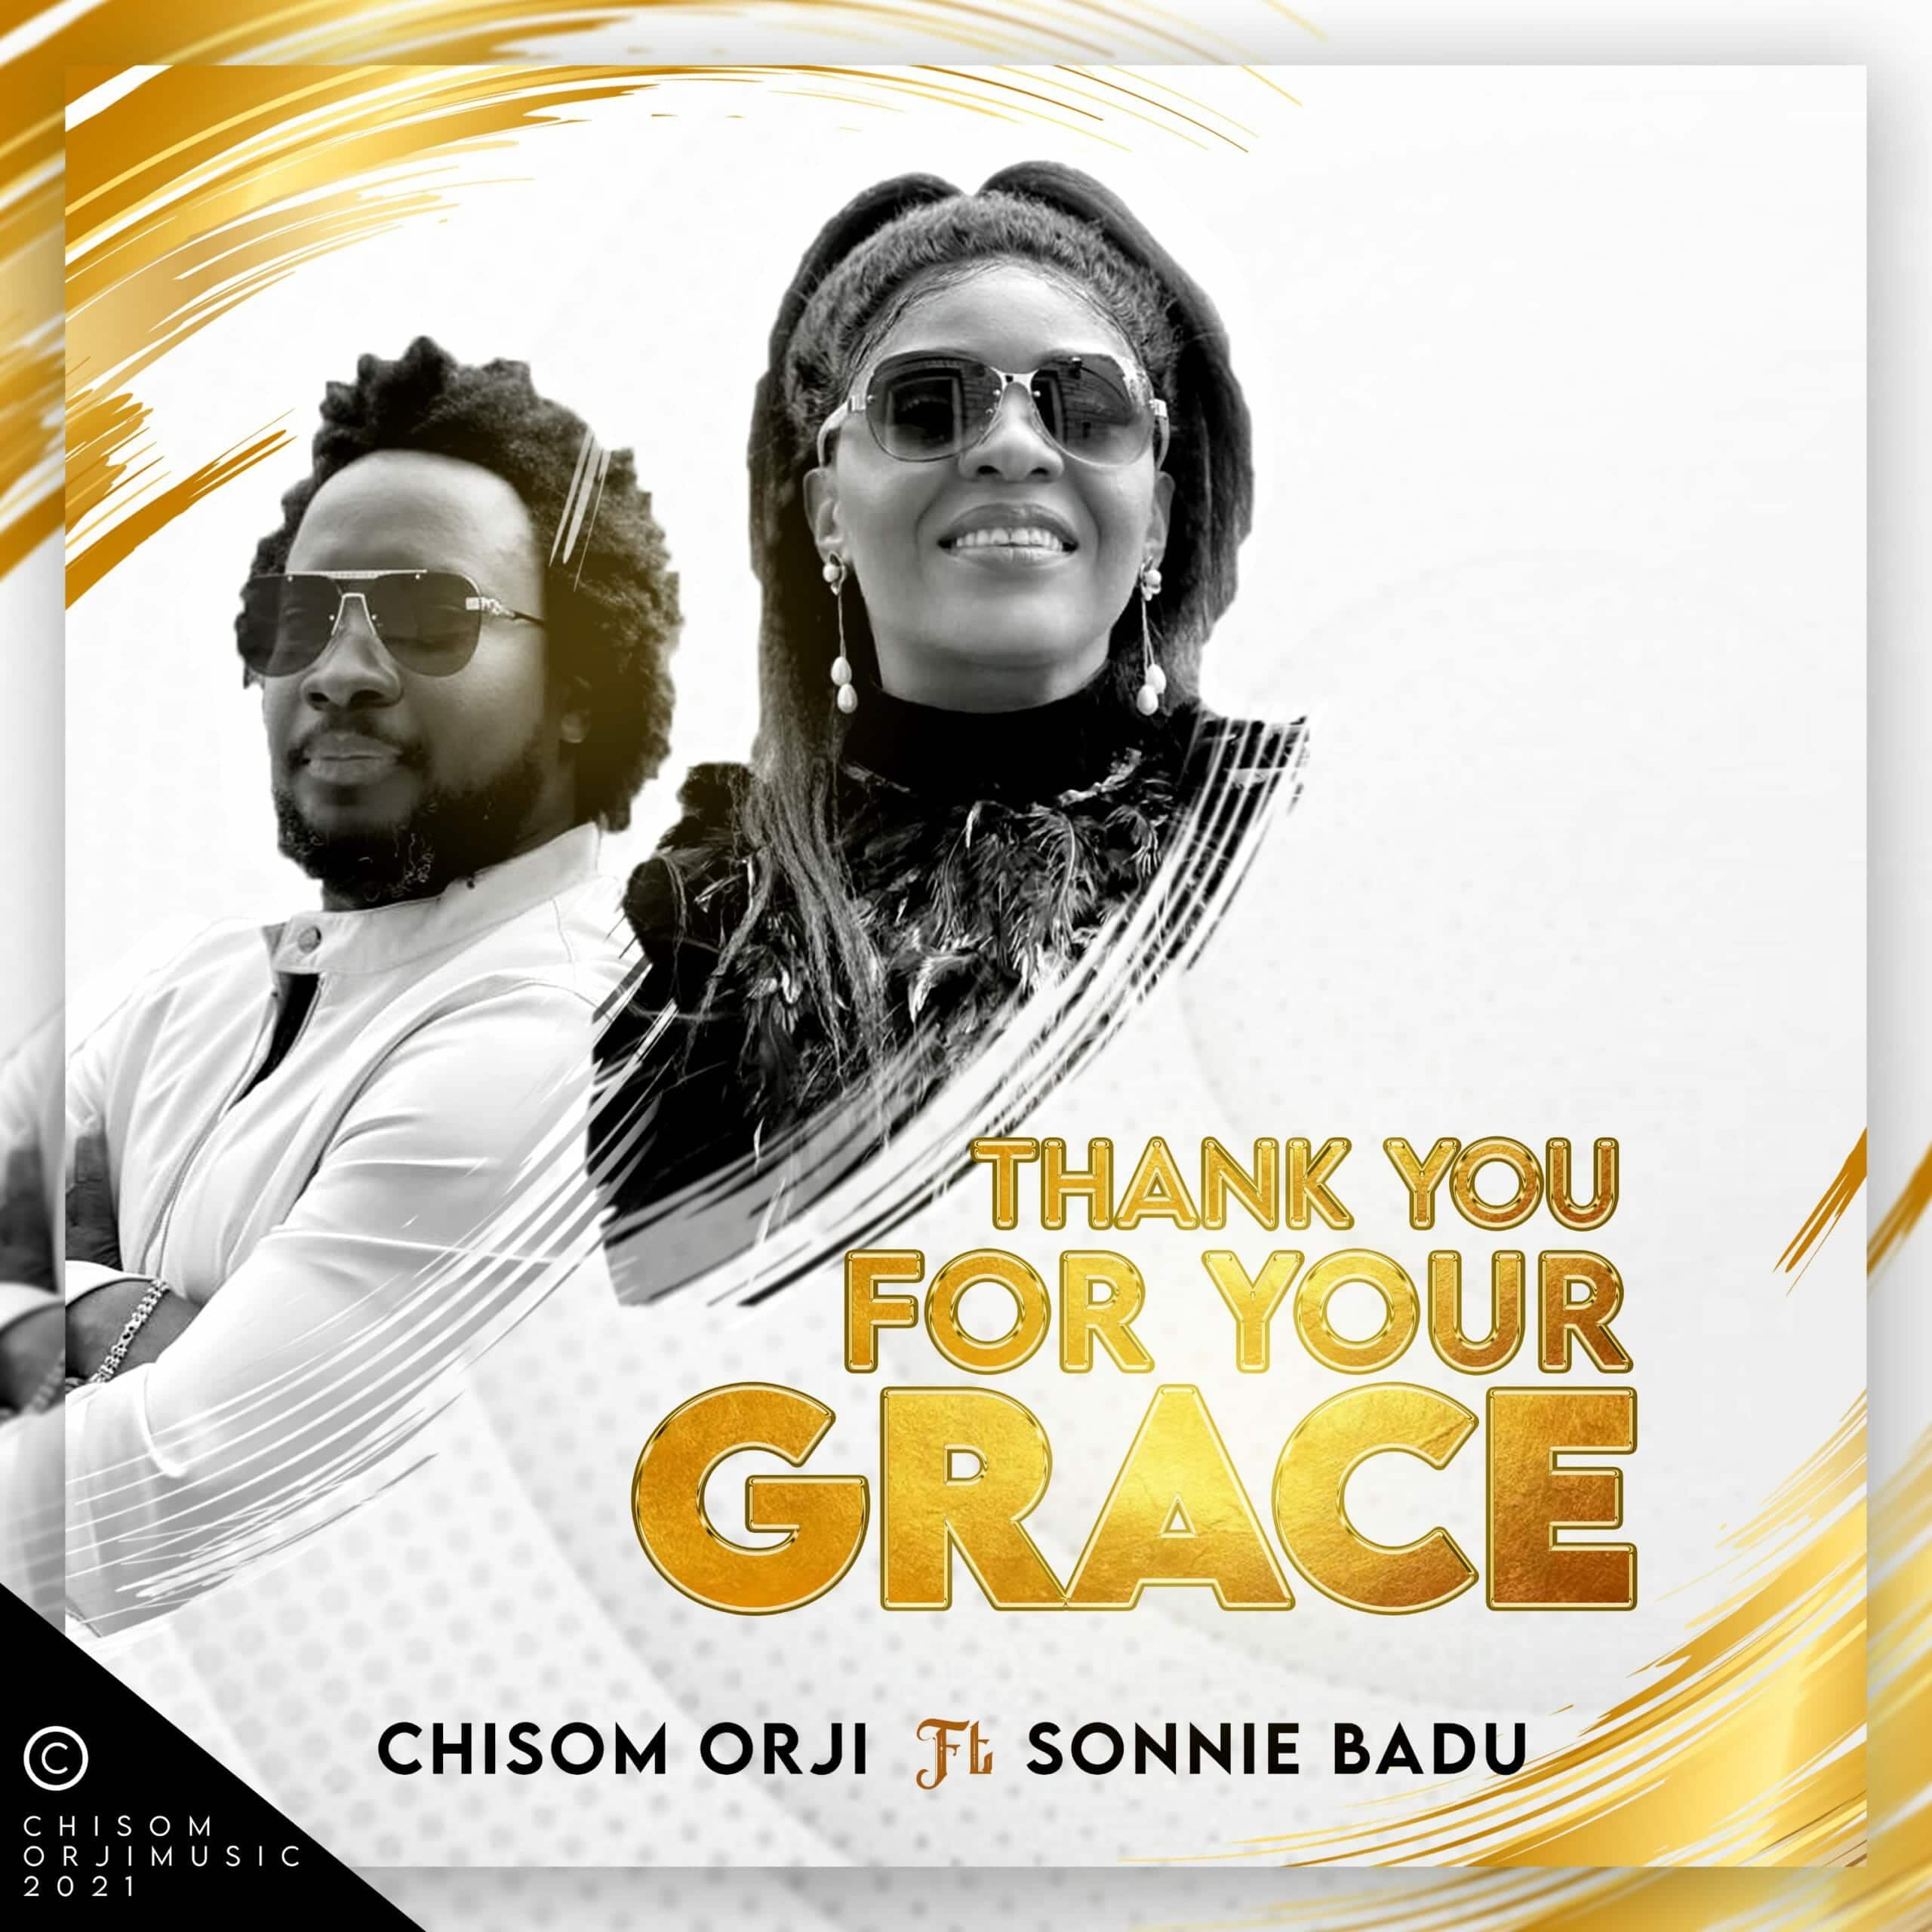 Thank You For Your Grace by Chisom Orji ft Sonnie Badu